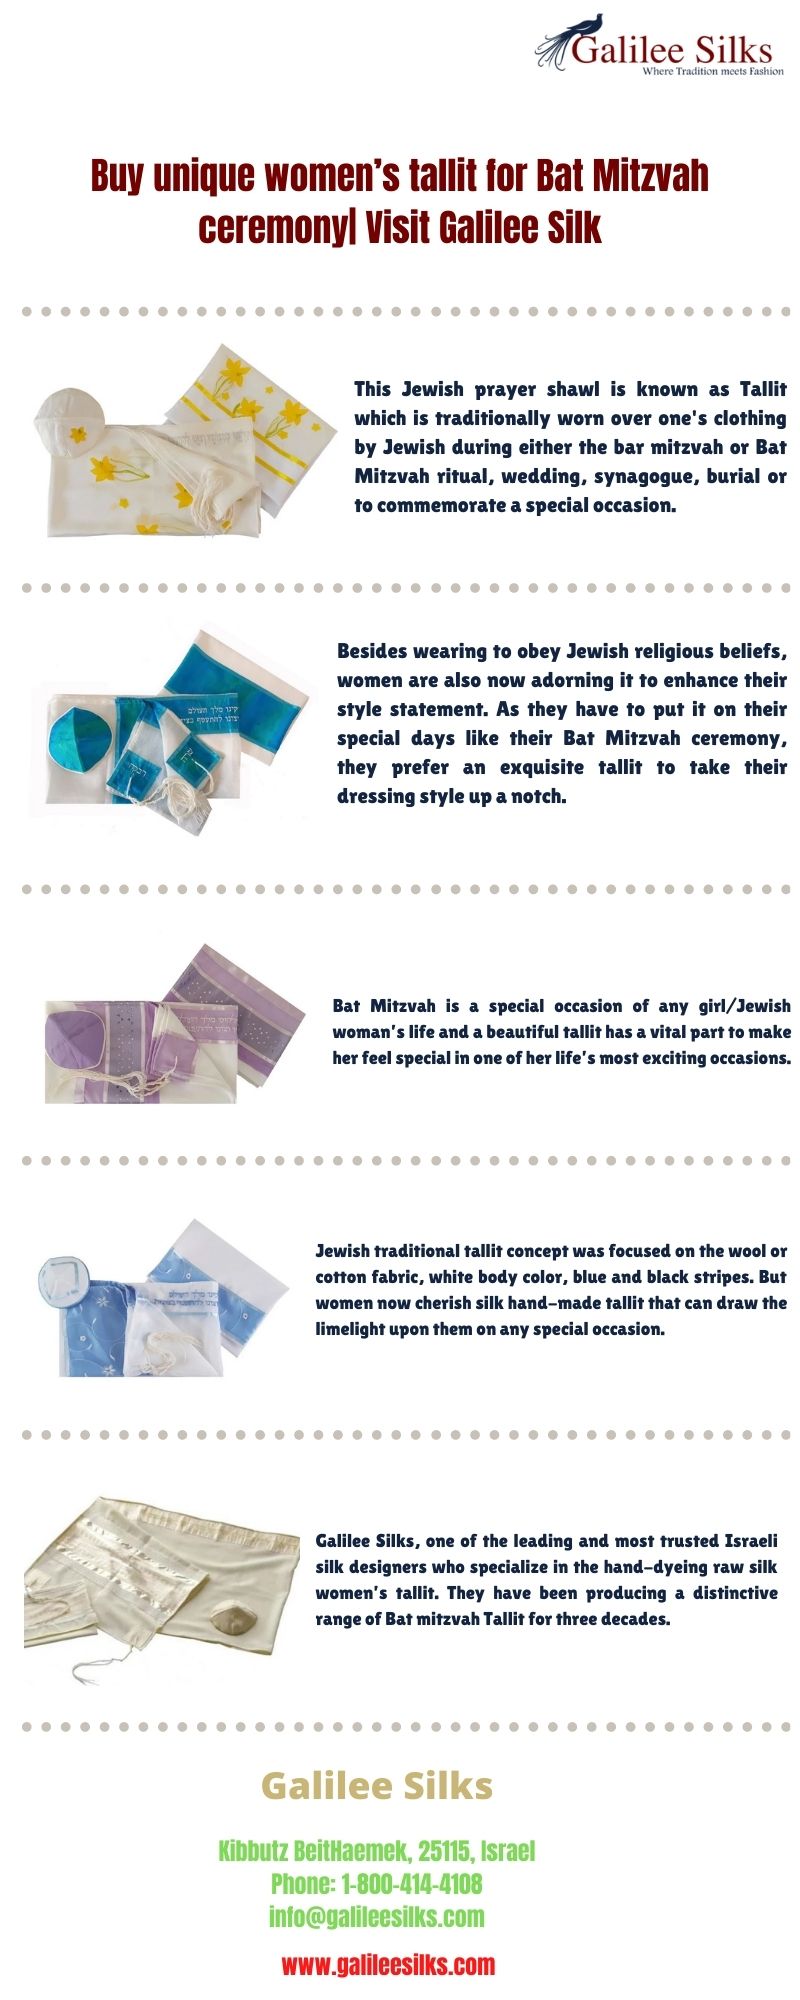 Buy unique women’s tallit for Bat Mitzvah ceremony| Visit Galilee Silk Buy a hand-made Israeli women’s tallit to gift a Jewish woman for the Bat Mitzvah ceremony.  For more details, visit this link: https://www.galileesilks.com/collections/womens-tallit-1 by amramrafi